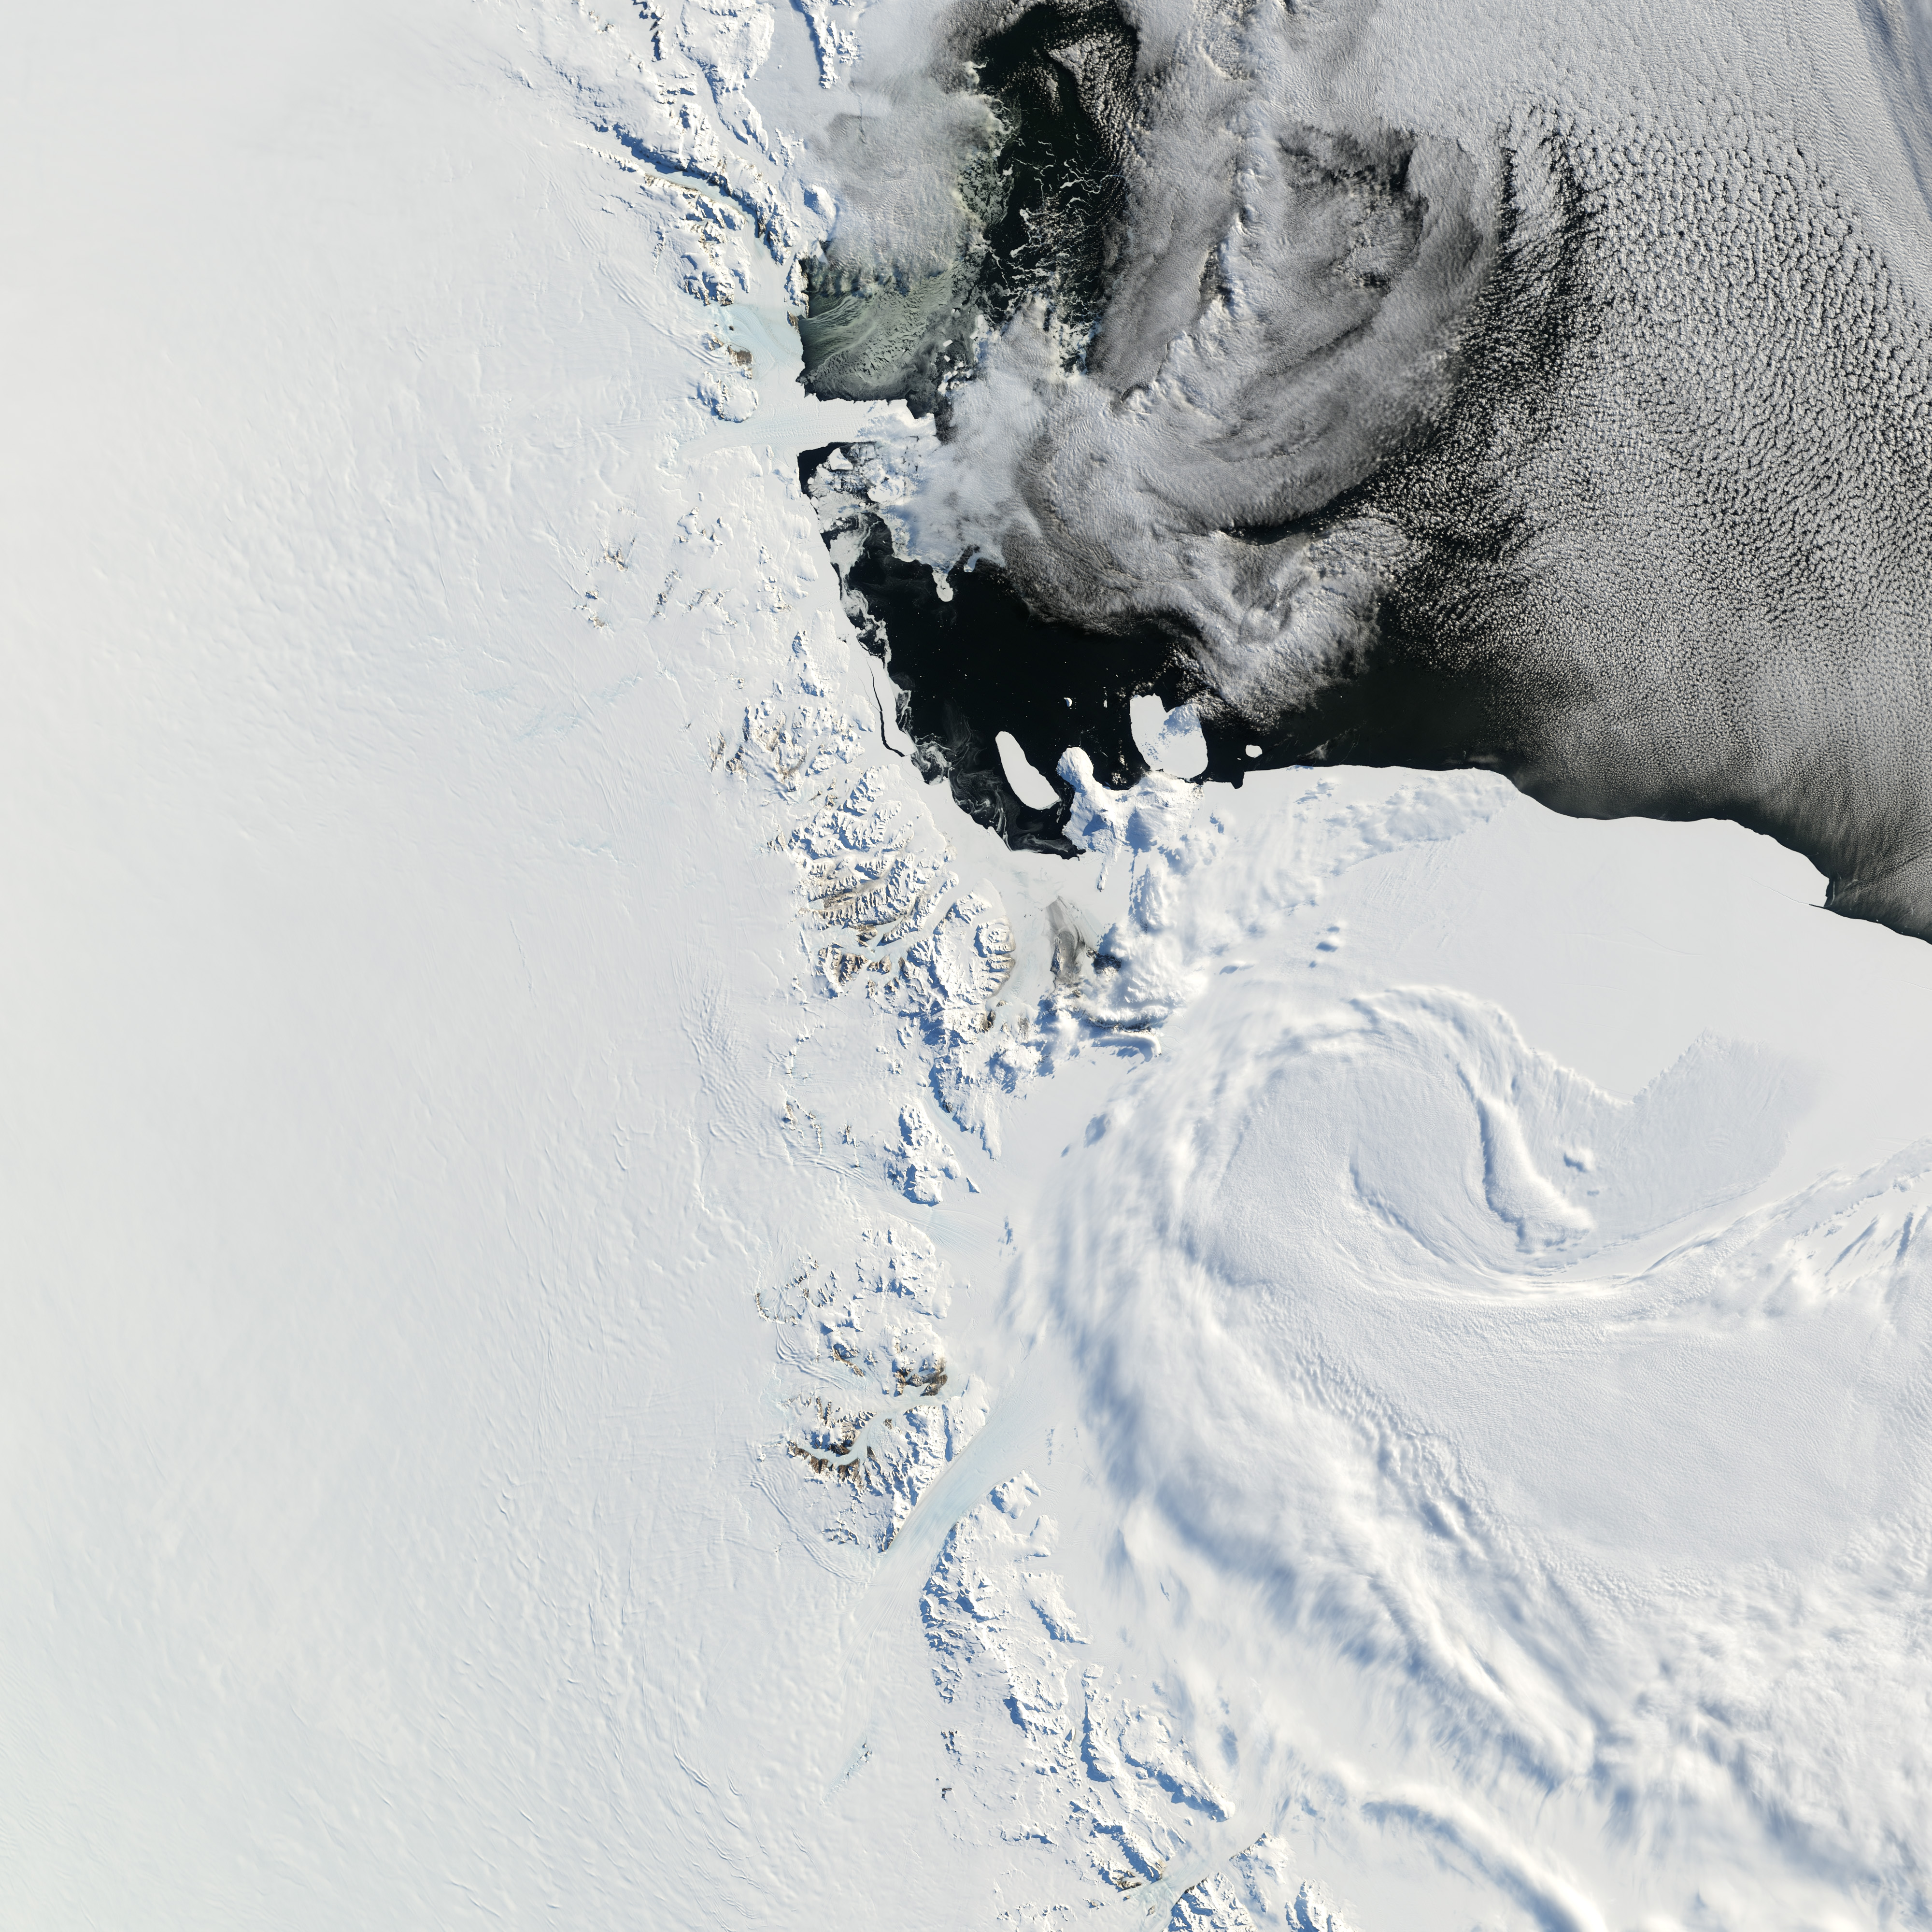 Sea Ice in McMurdo Sound, Antarctica - related image preview